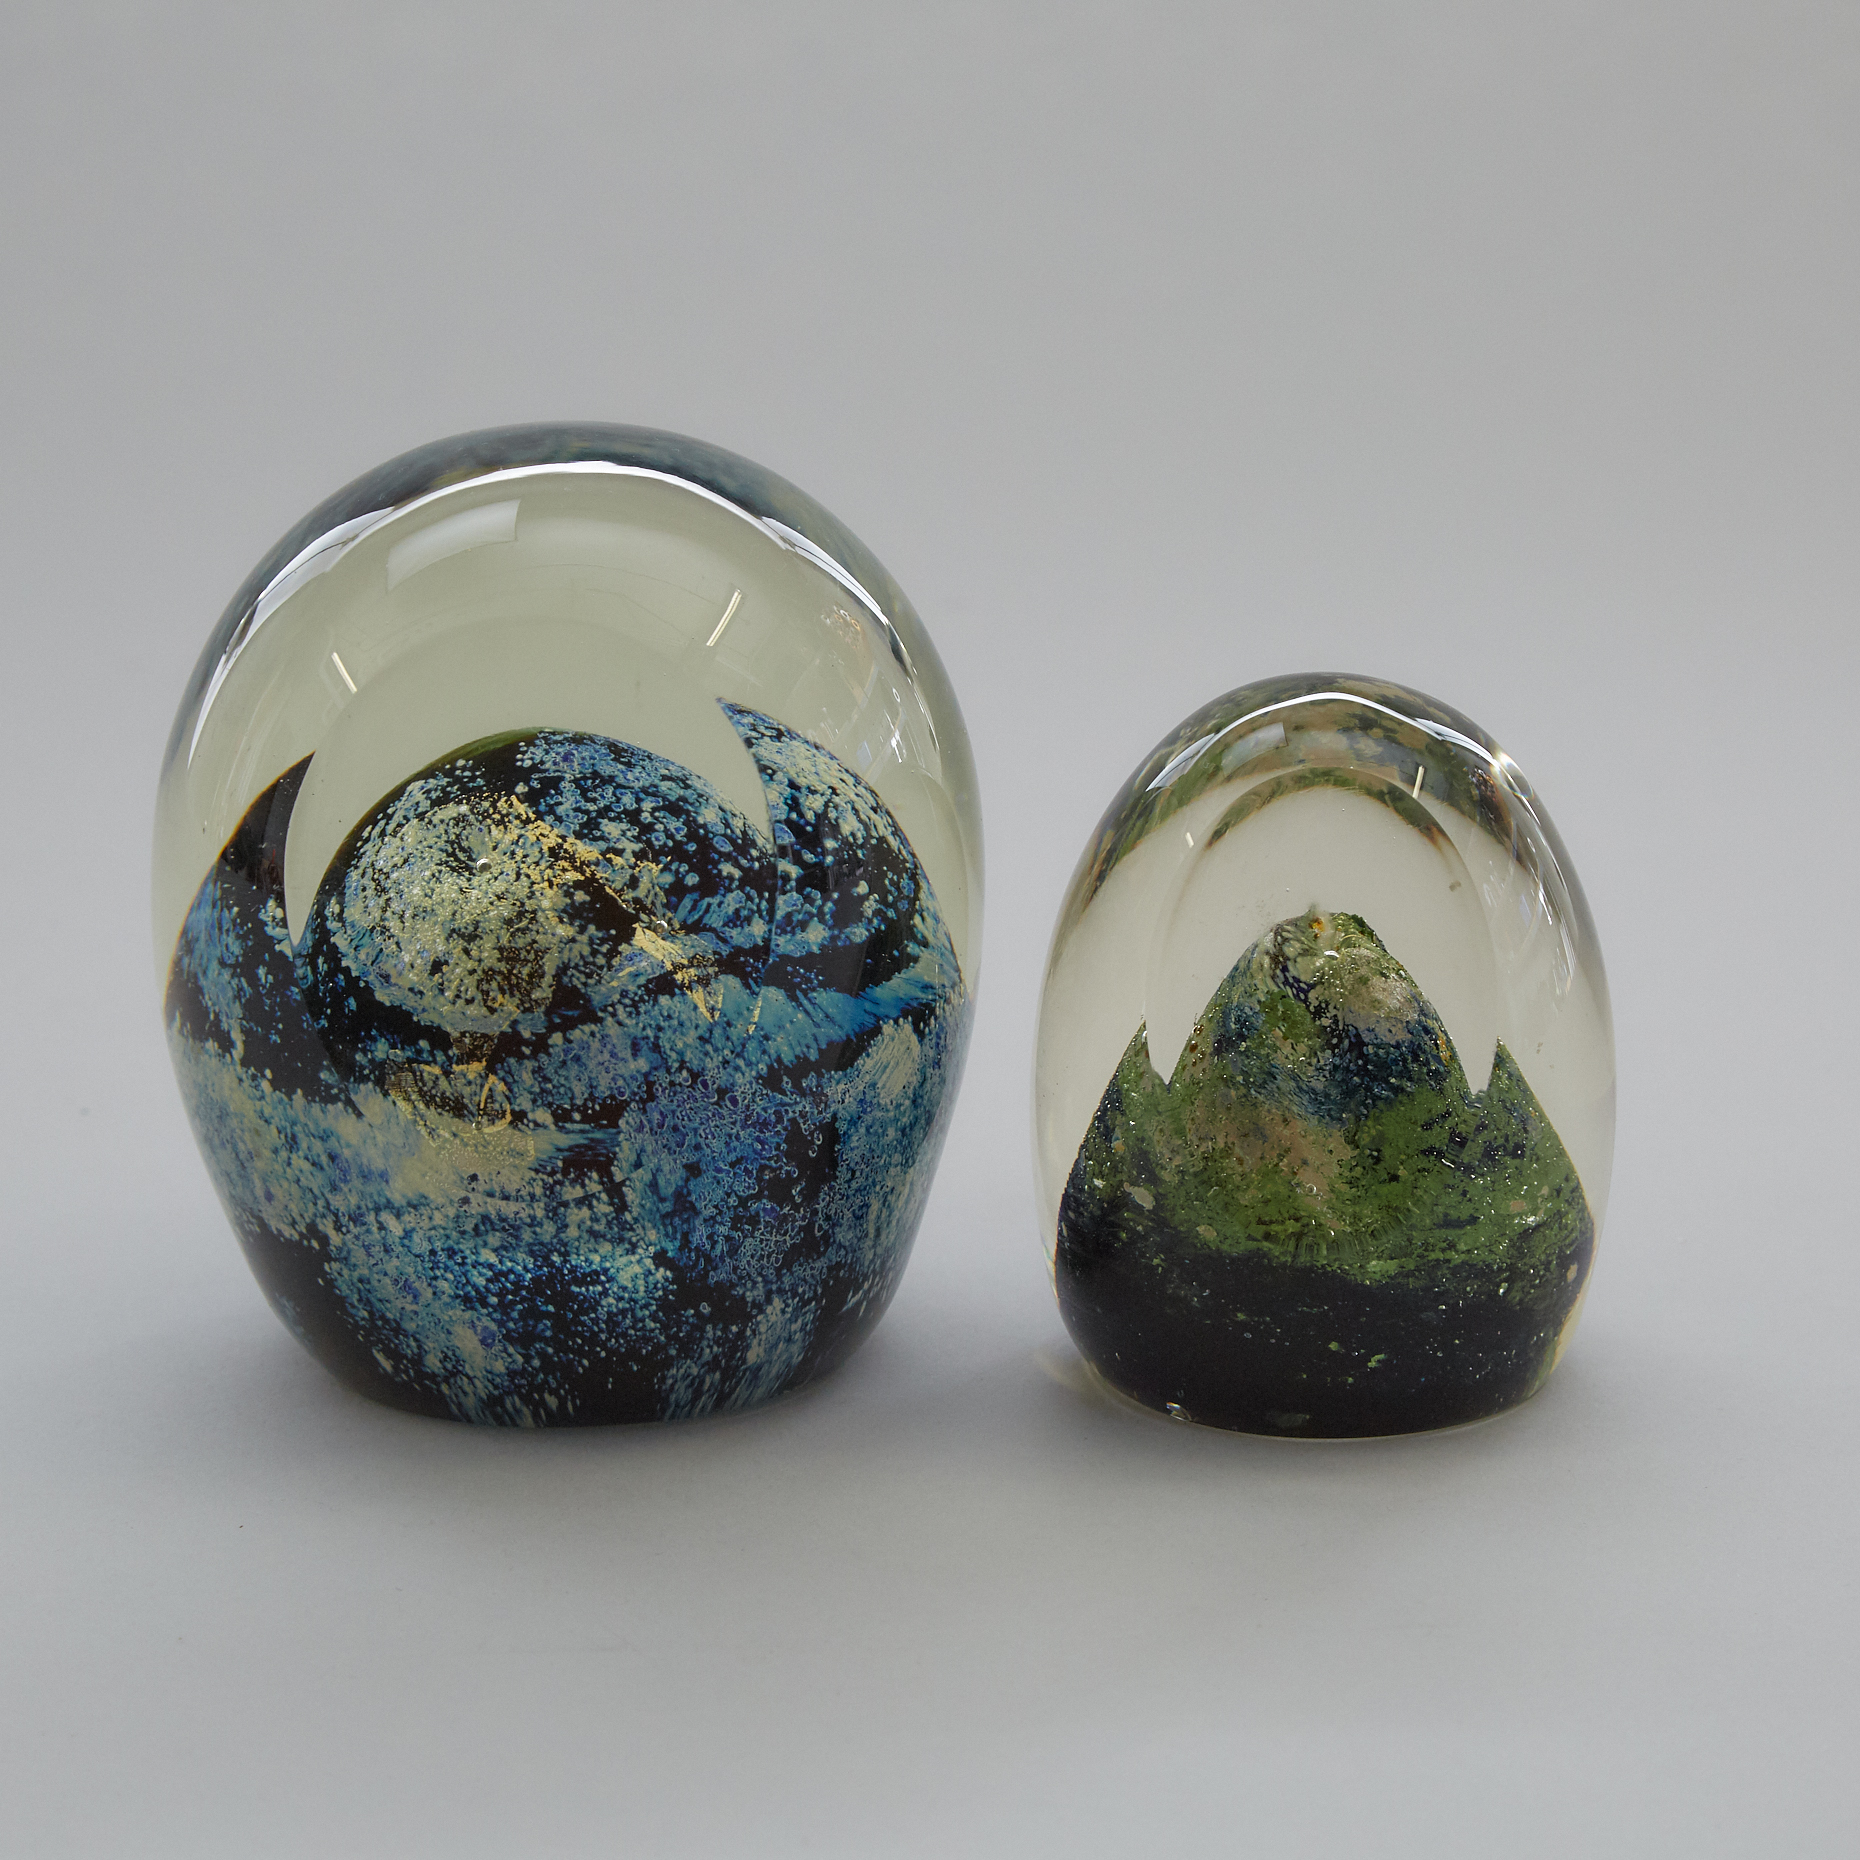 Toan Klein (American/Canadian, b.1949), Two Internally Decorated Glass Paperweights, 1977/81